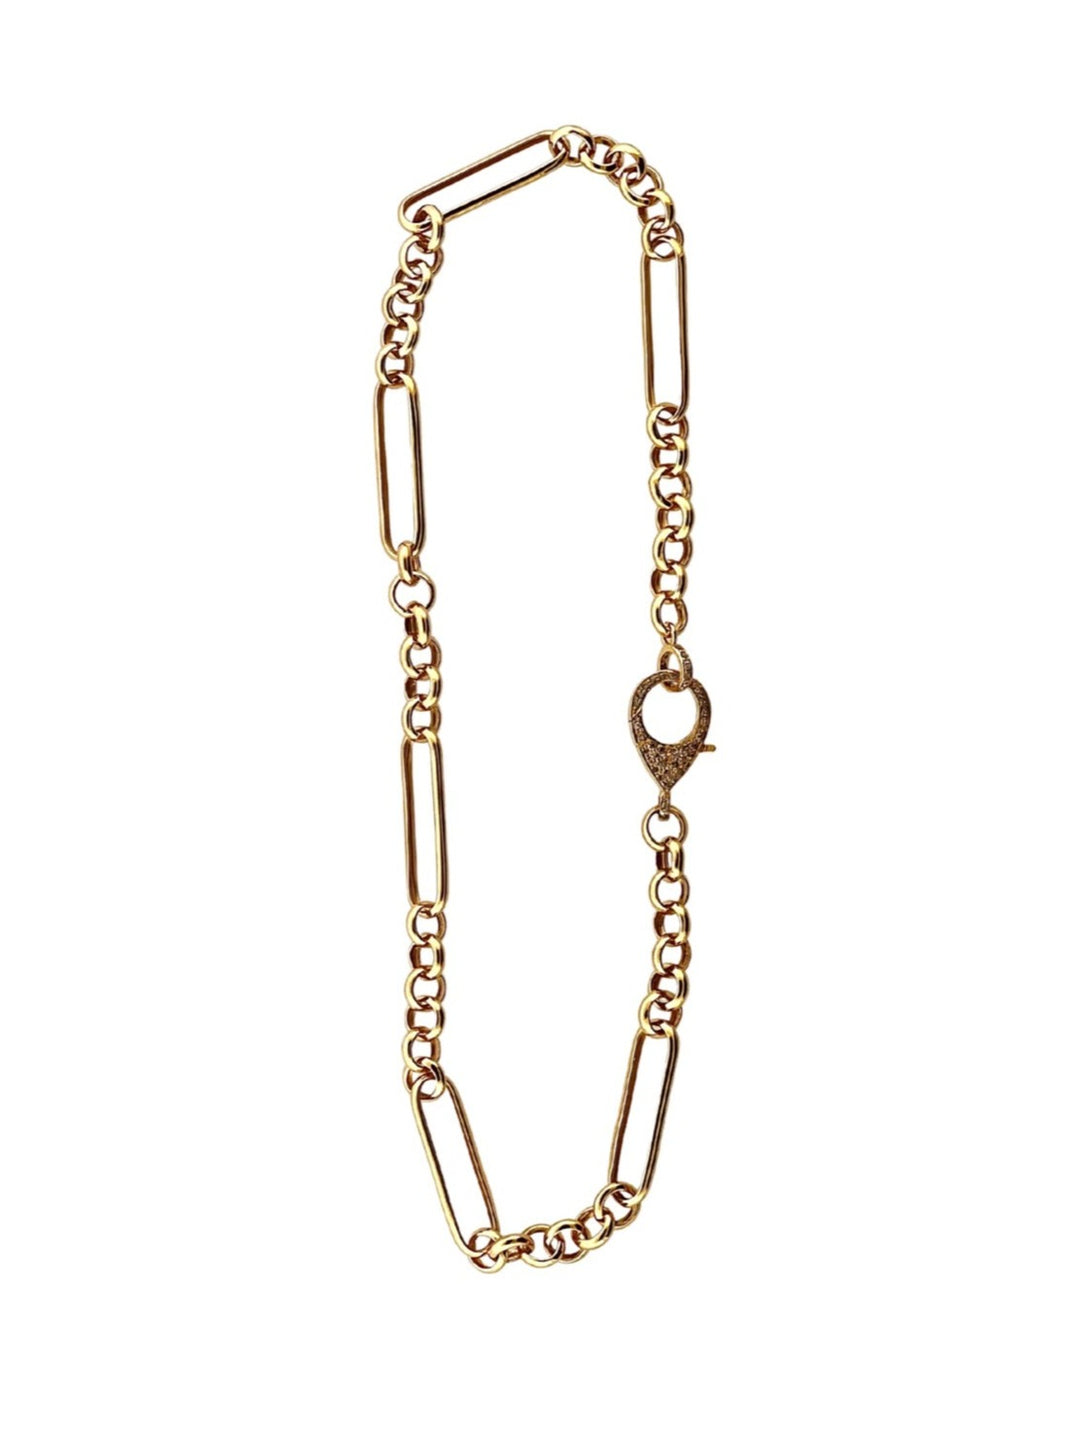 The Woods Fine Jewelry Small Chain